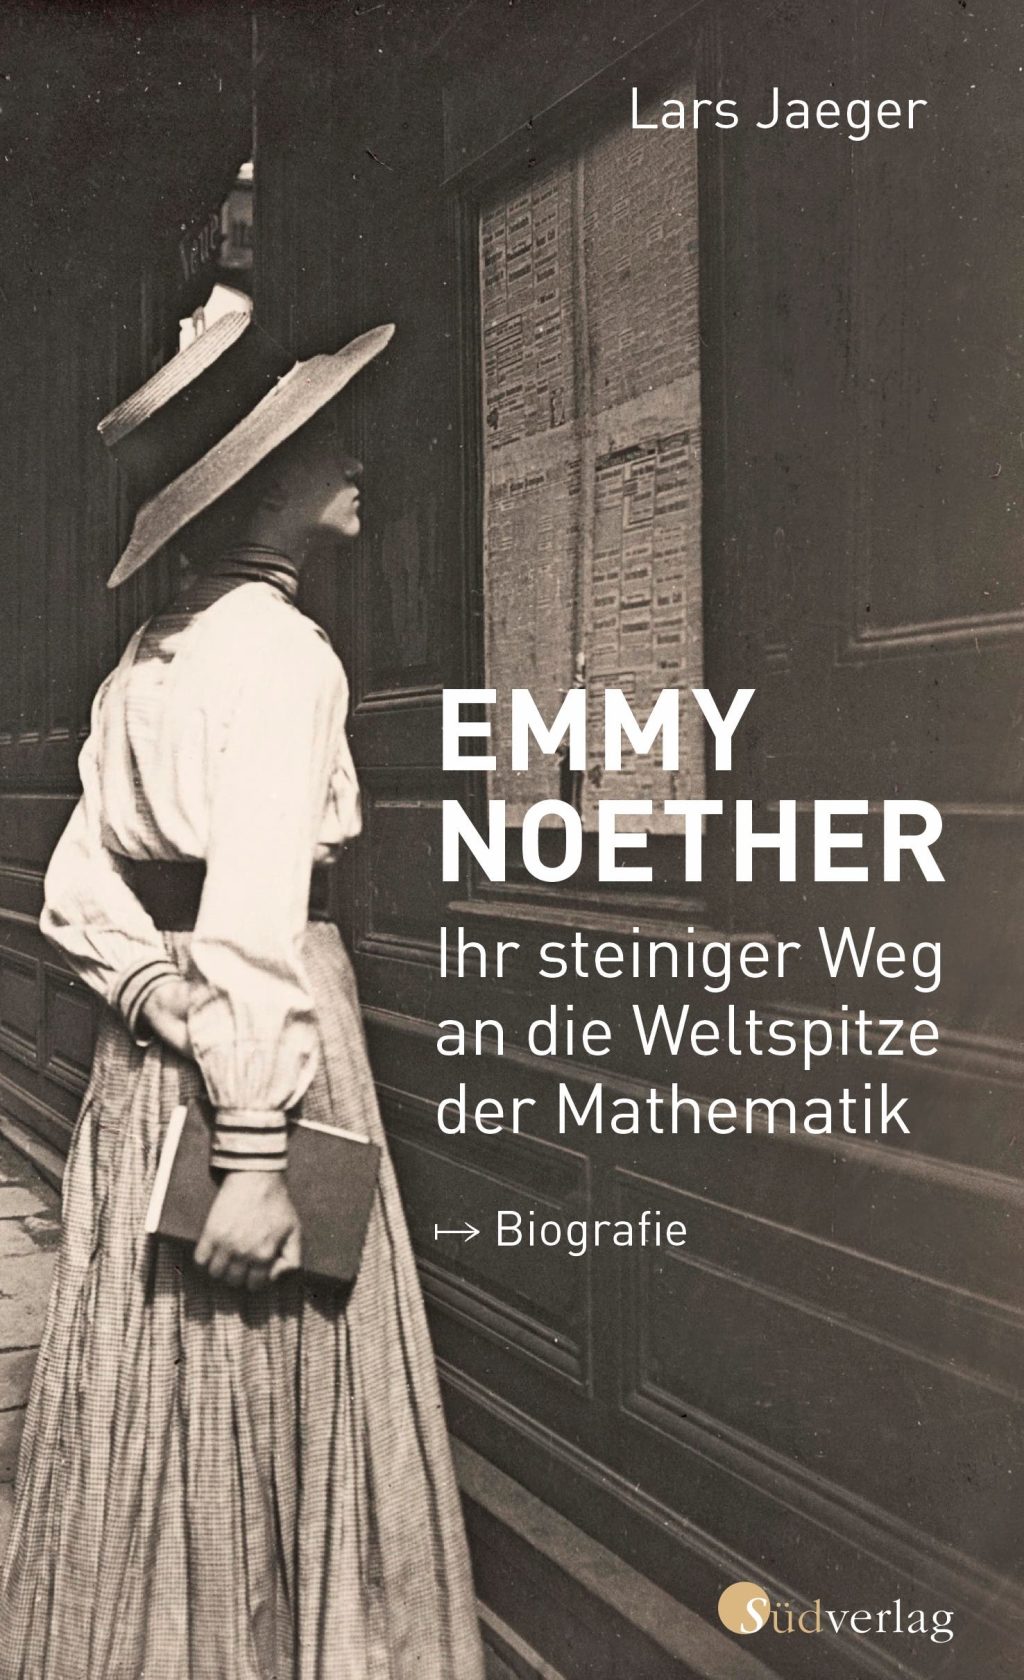 Emmy Noether Book Review - Spectrum of Science